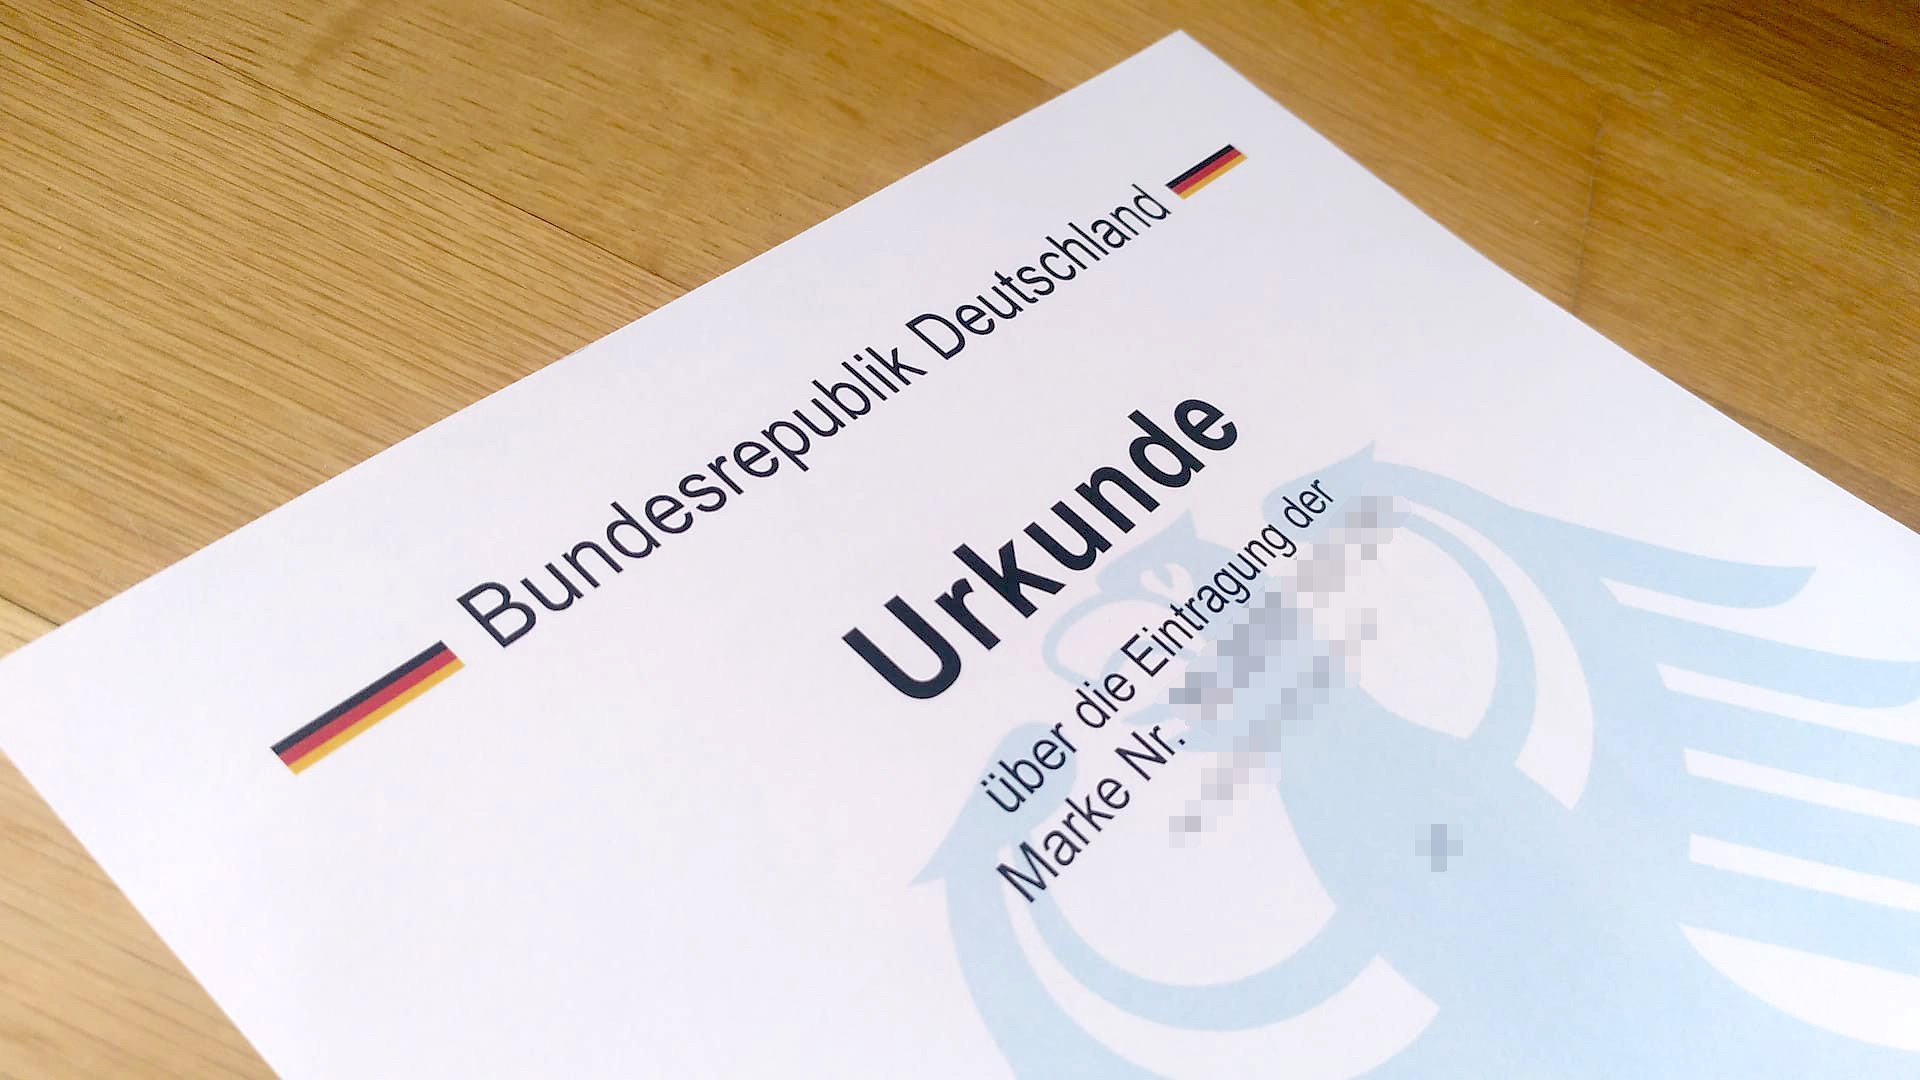 Official registered mark documentation of the german federal republic, issued by the DPMA trademark office.